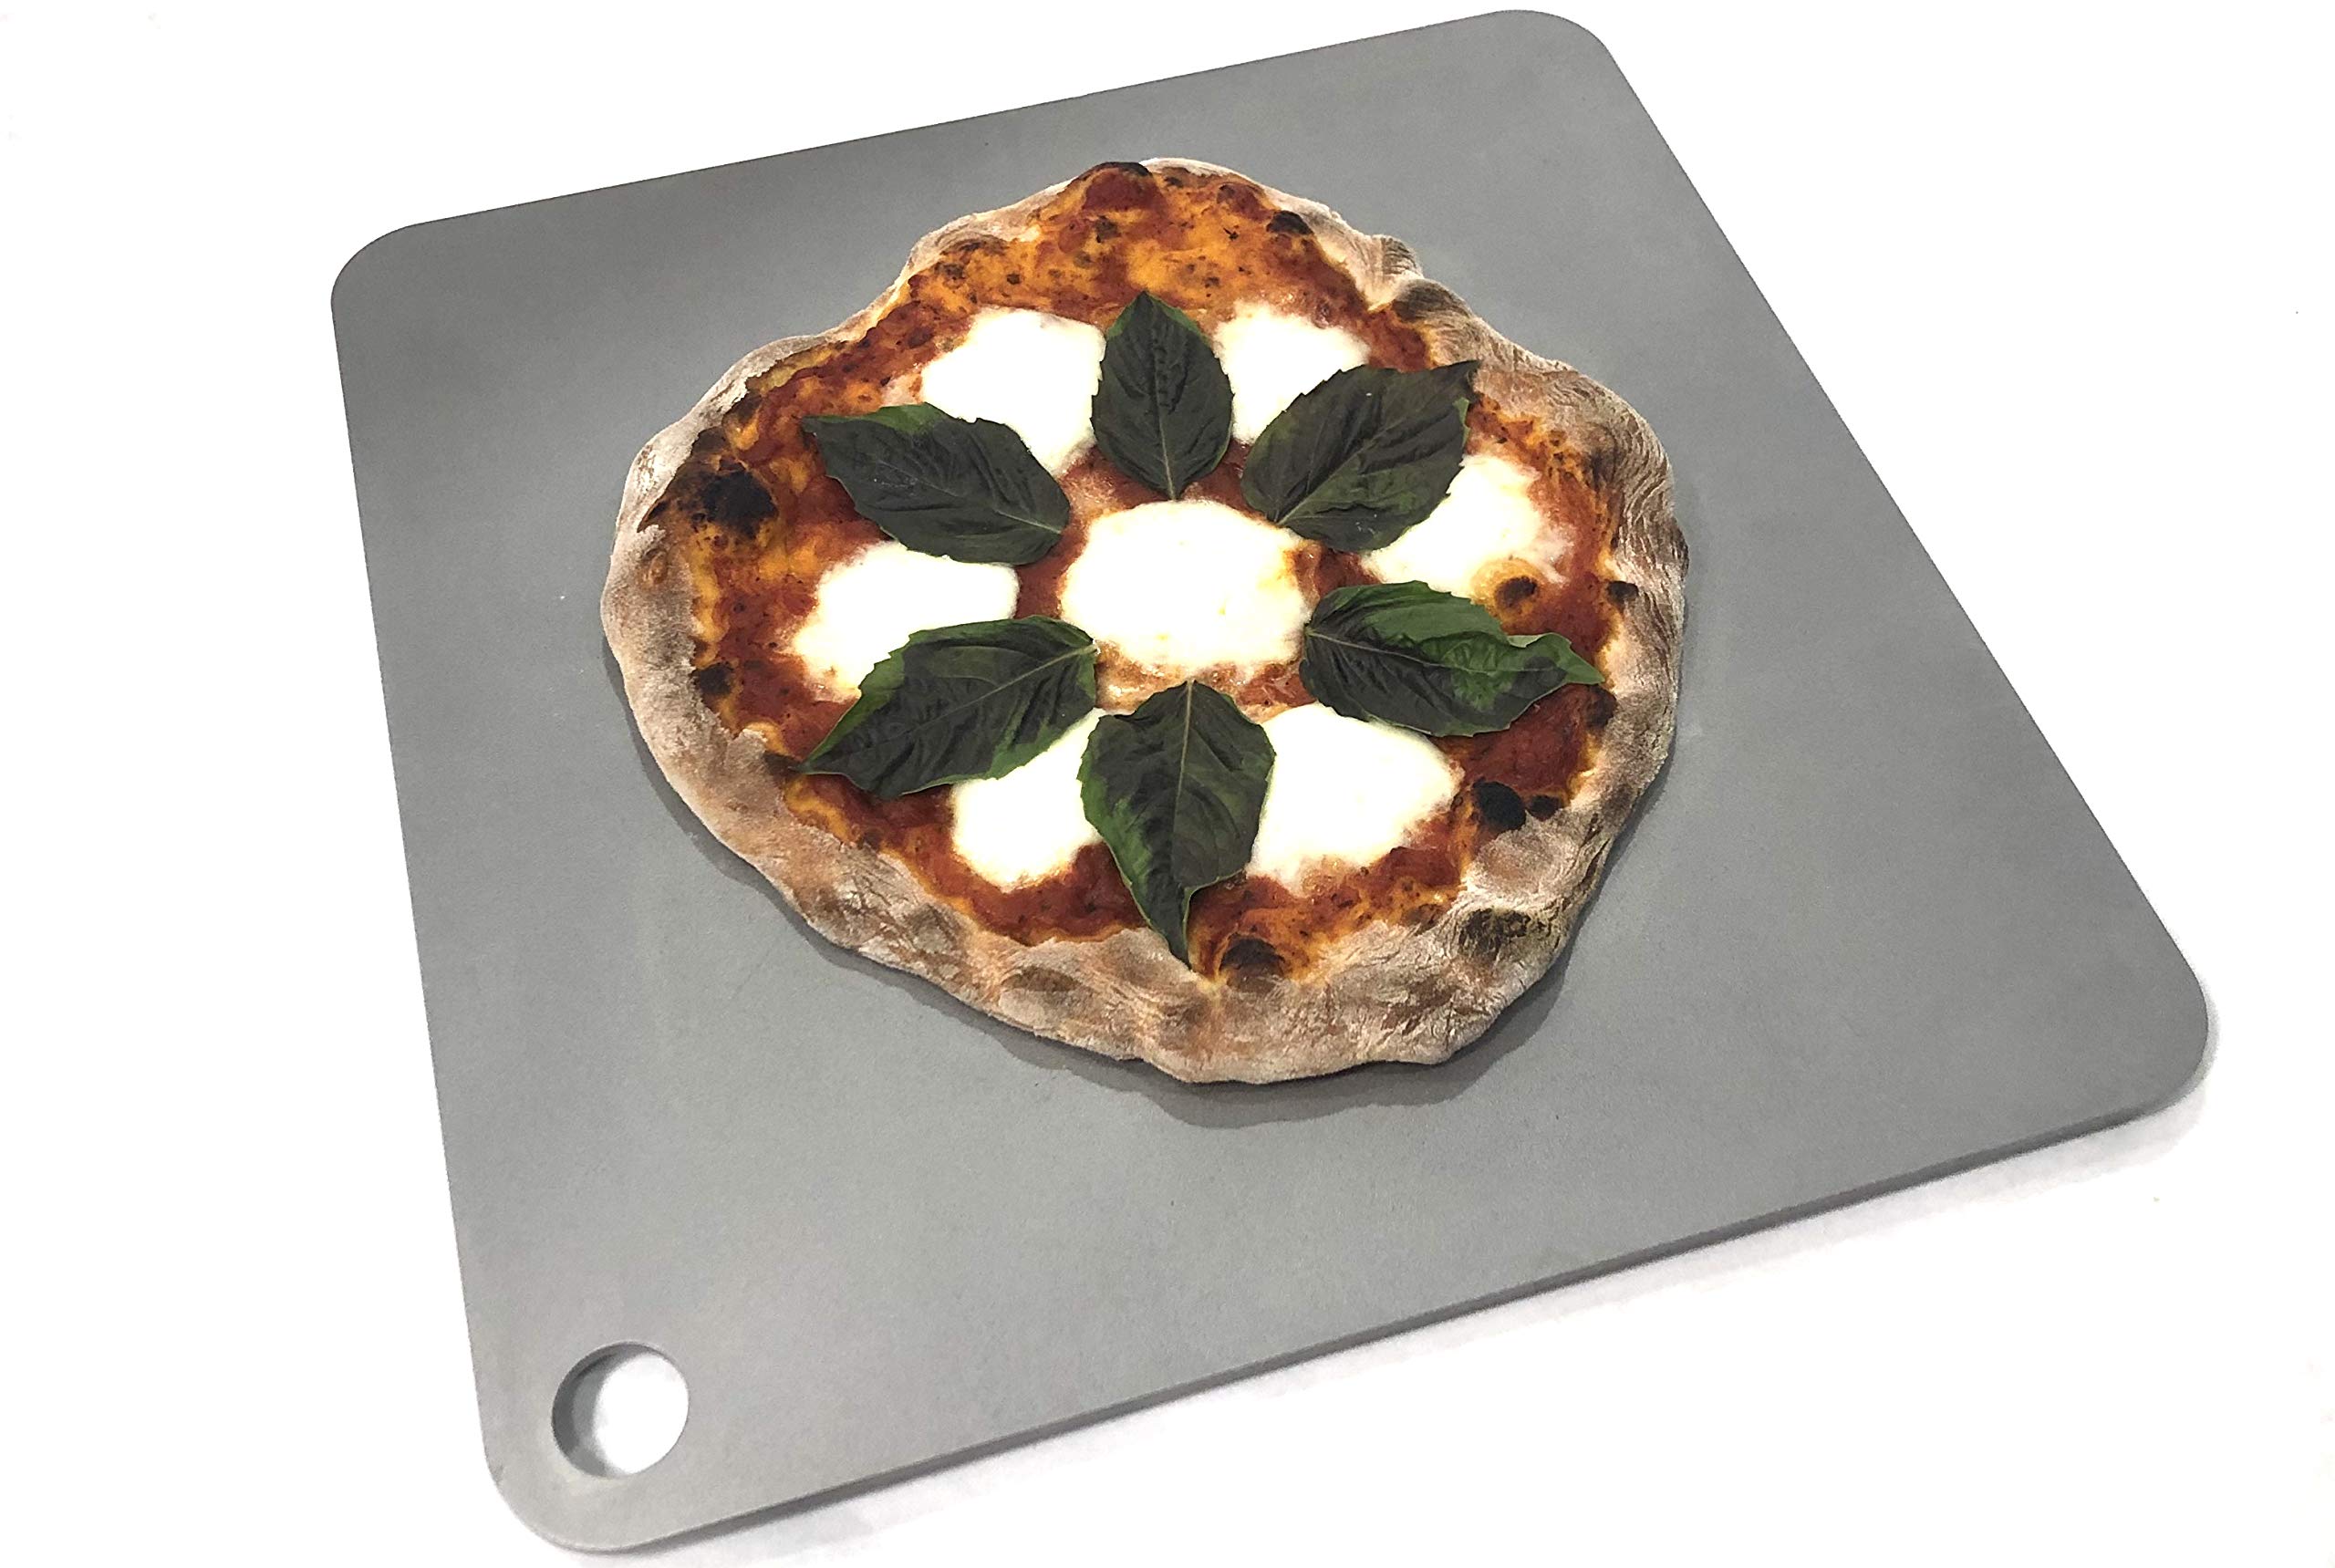 Square Pizza Steel by Conductive Cooking (3/16" Standard, 14"x20" XL)